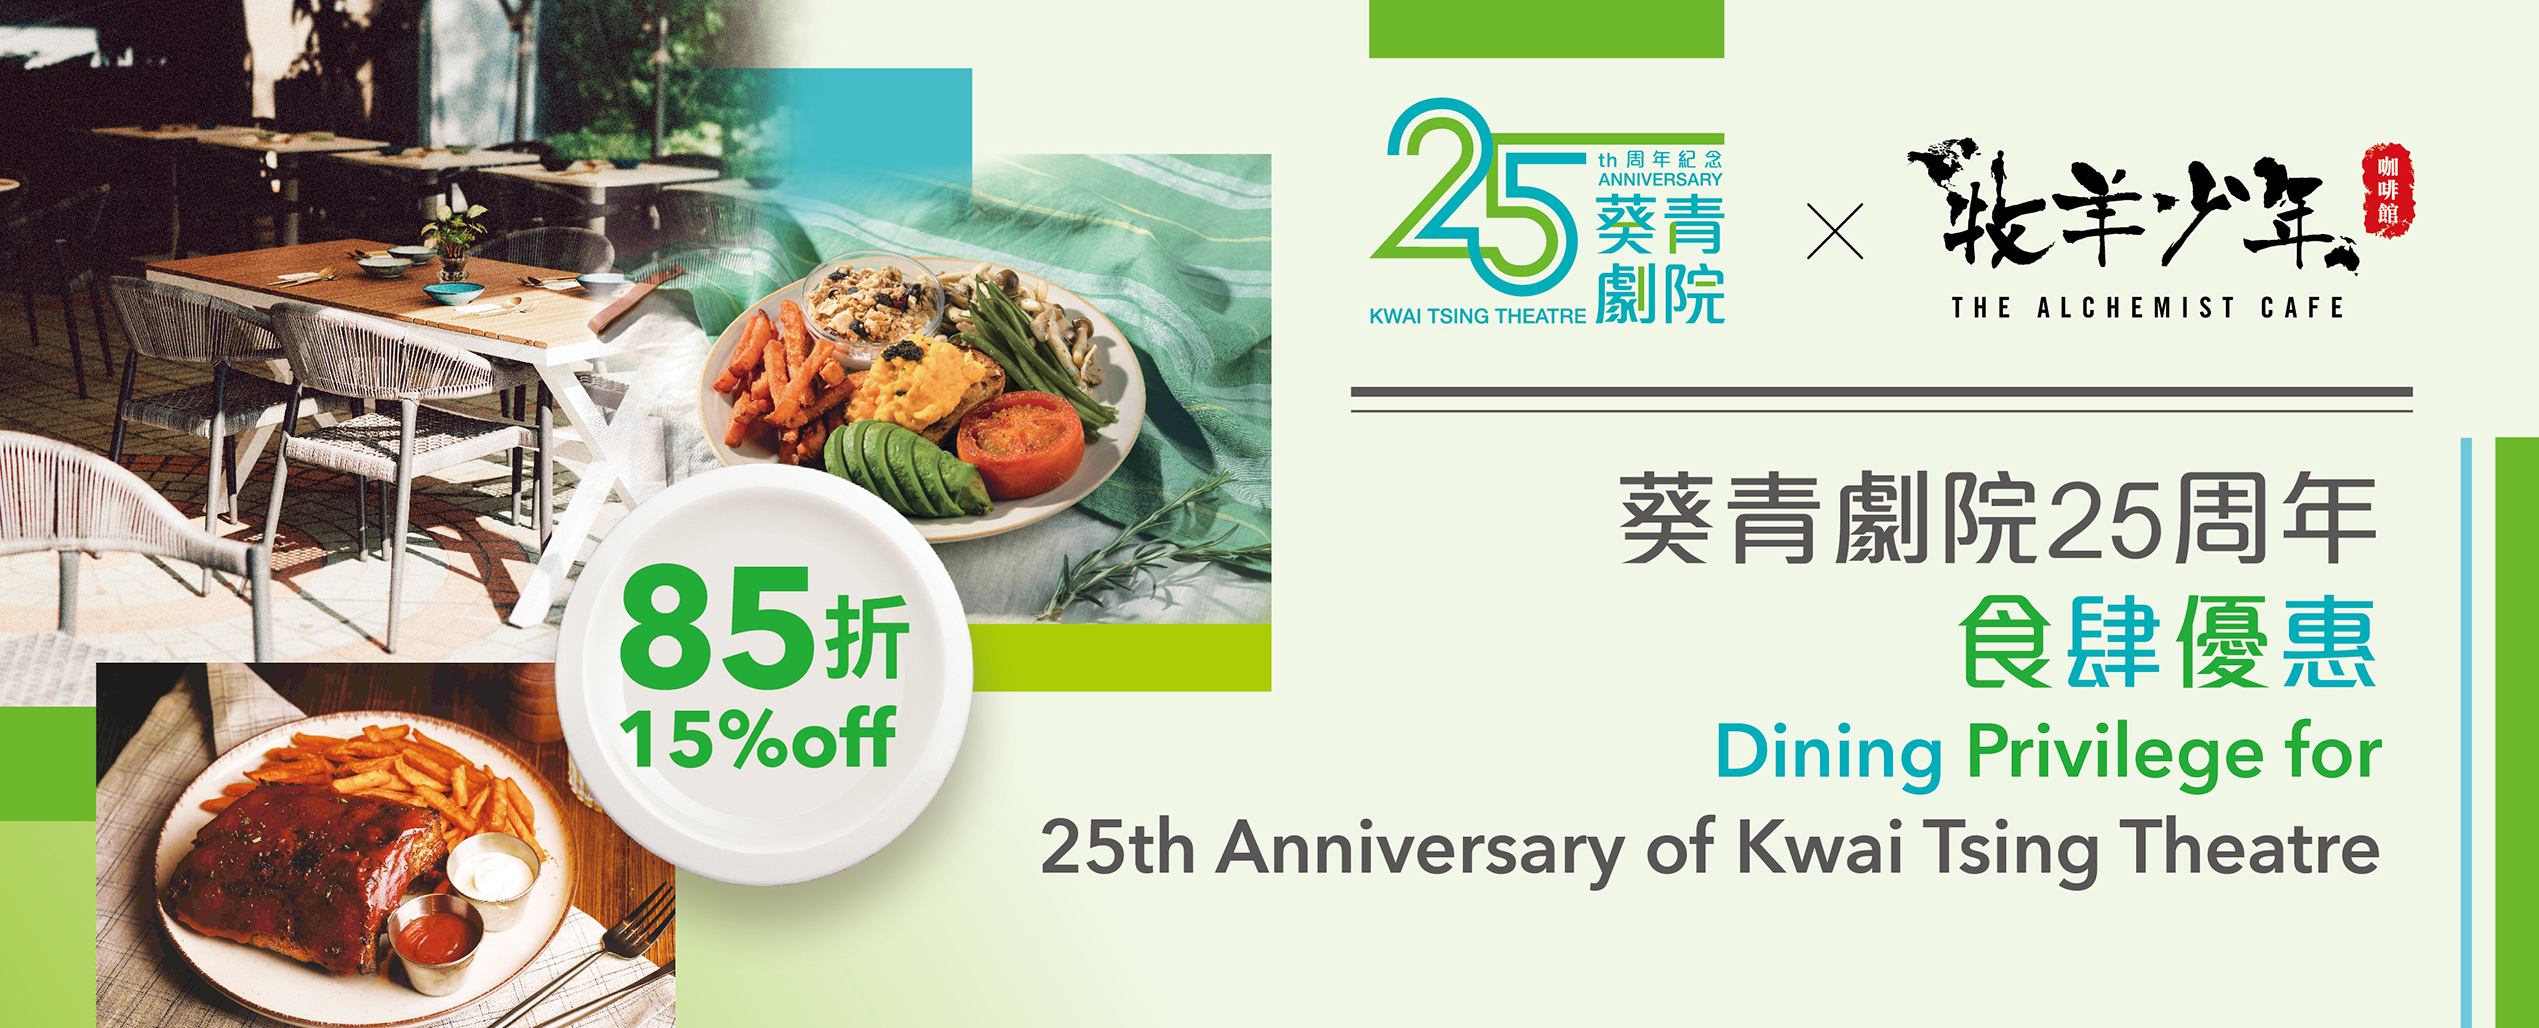 Dining Privilege for 25th Anniversary of Kwai Tsing Theatre